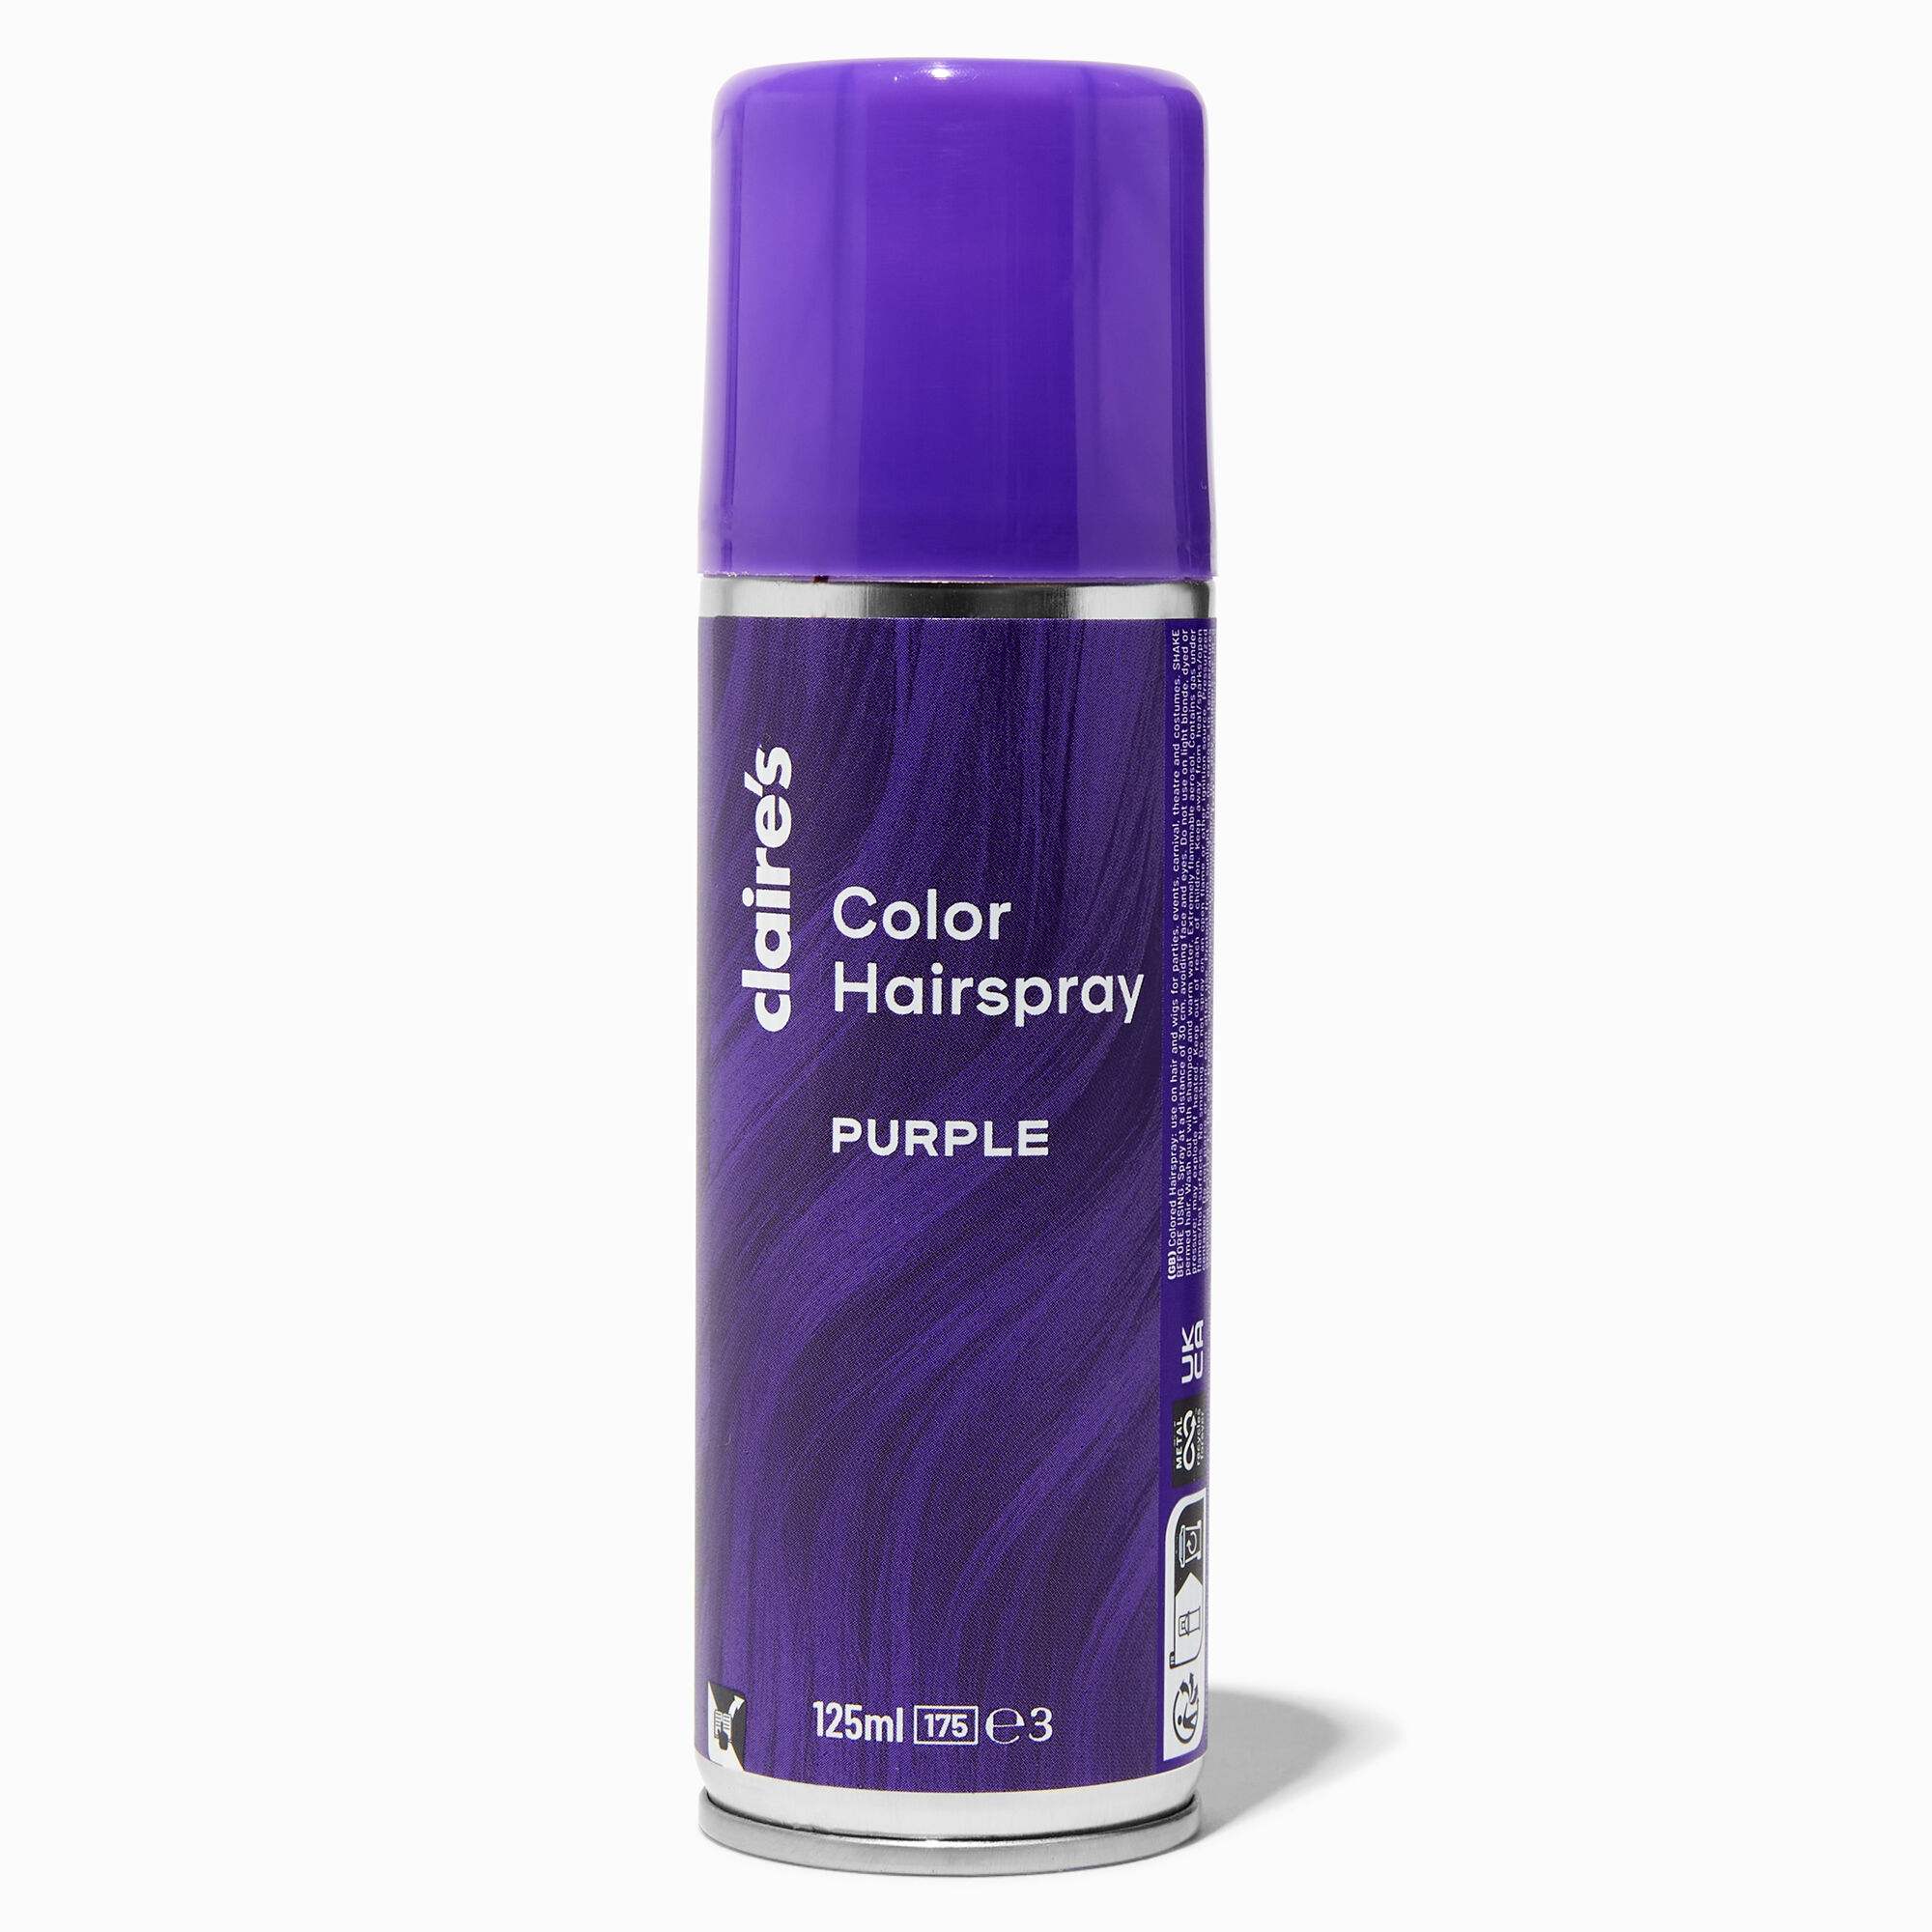 View Claires Colour Hairspray Purple information